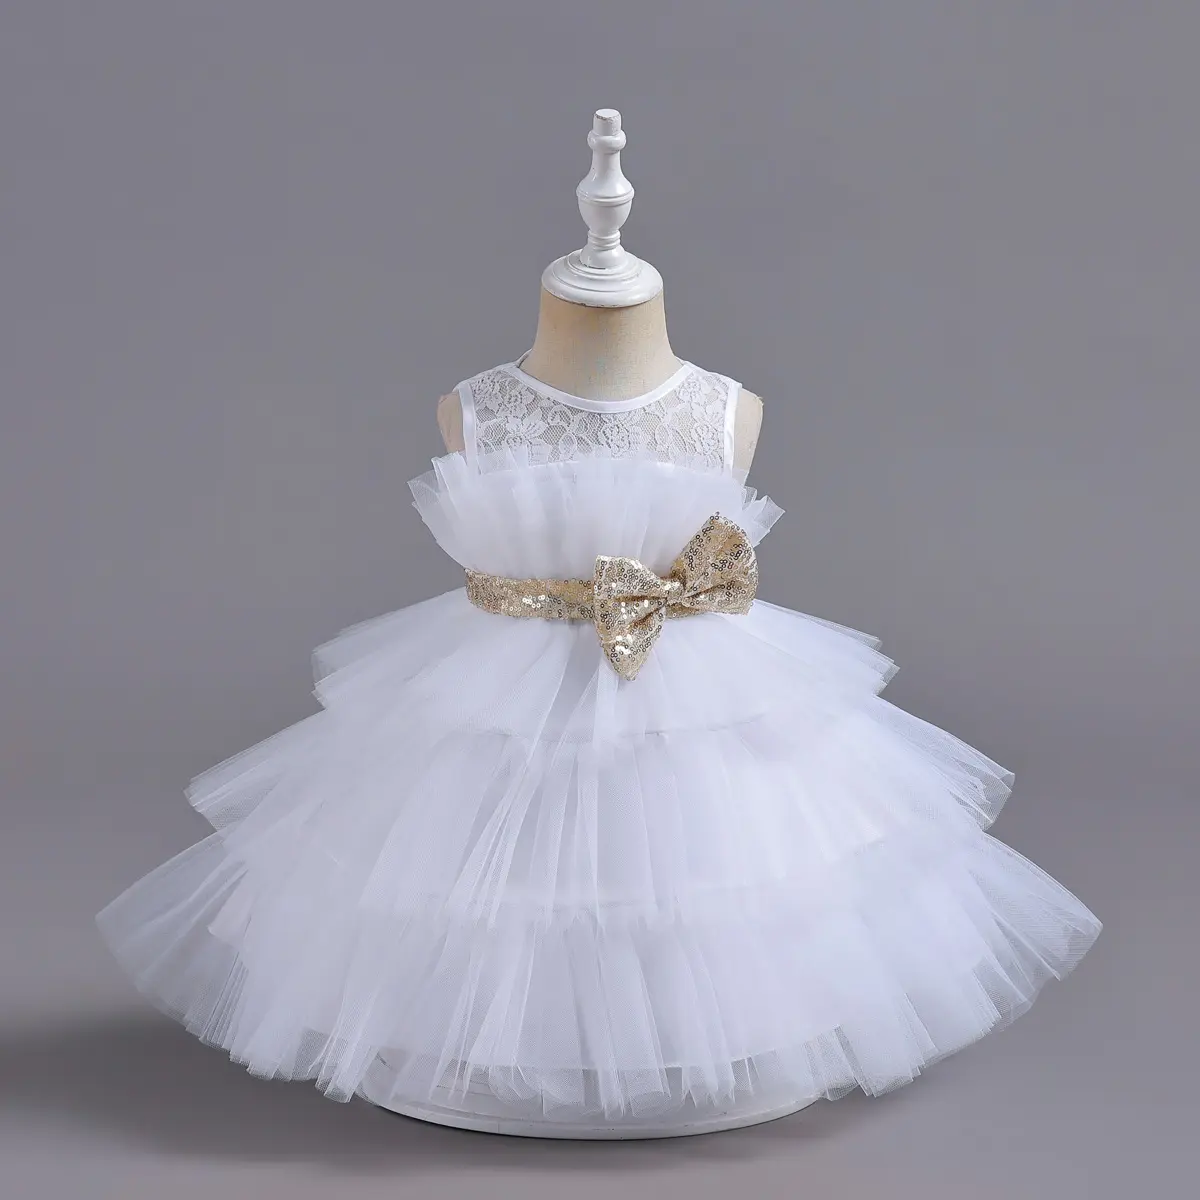 Flower Baby Girl Lace Dress Toddler kids Tulle Sleeveless Bow Princess Party Wedding Pageant Bridesmaid Y22BB